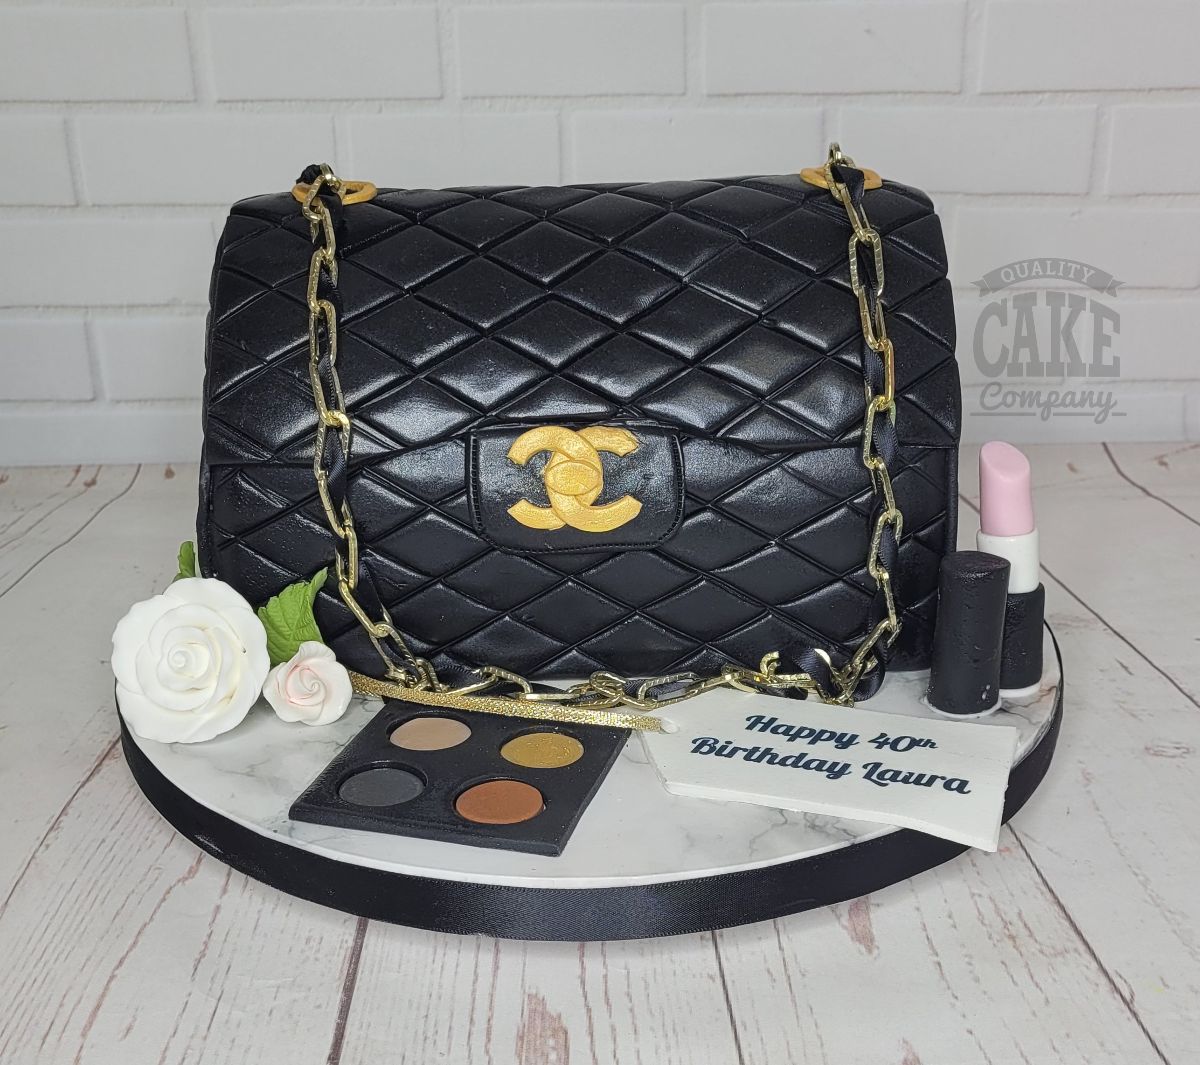 Purse Cake with Buttercream Icing